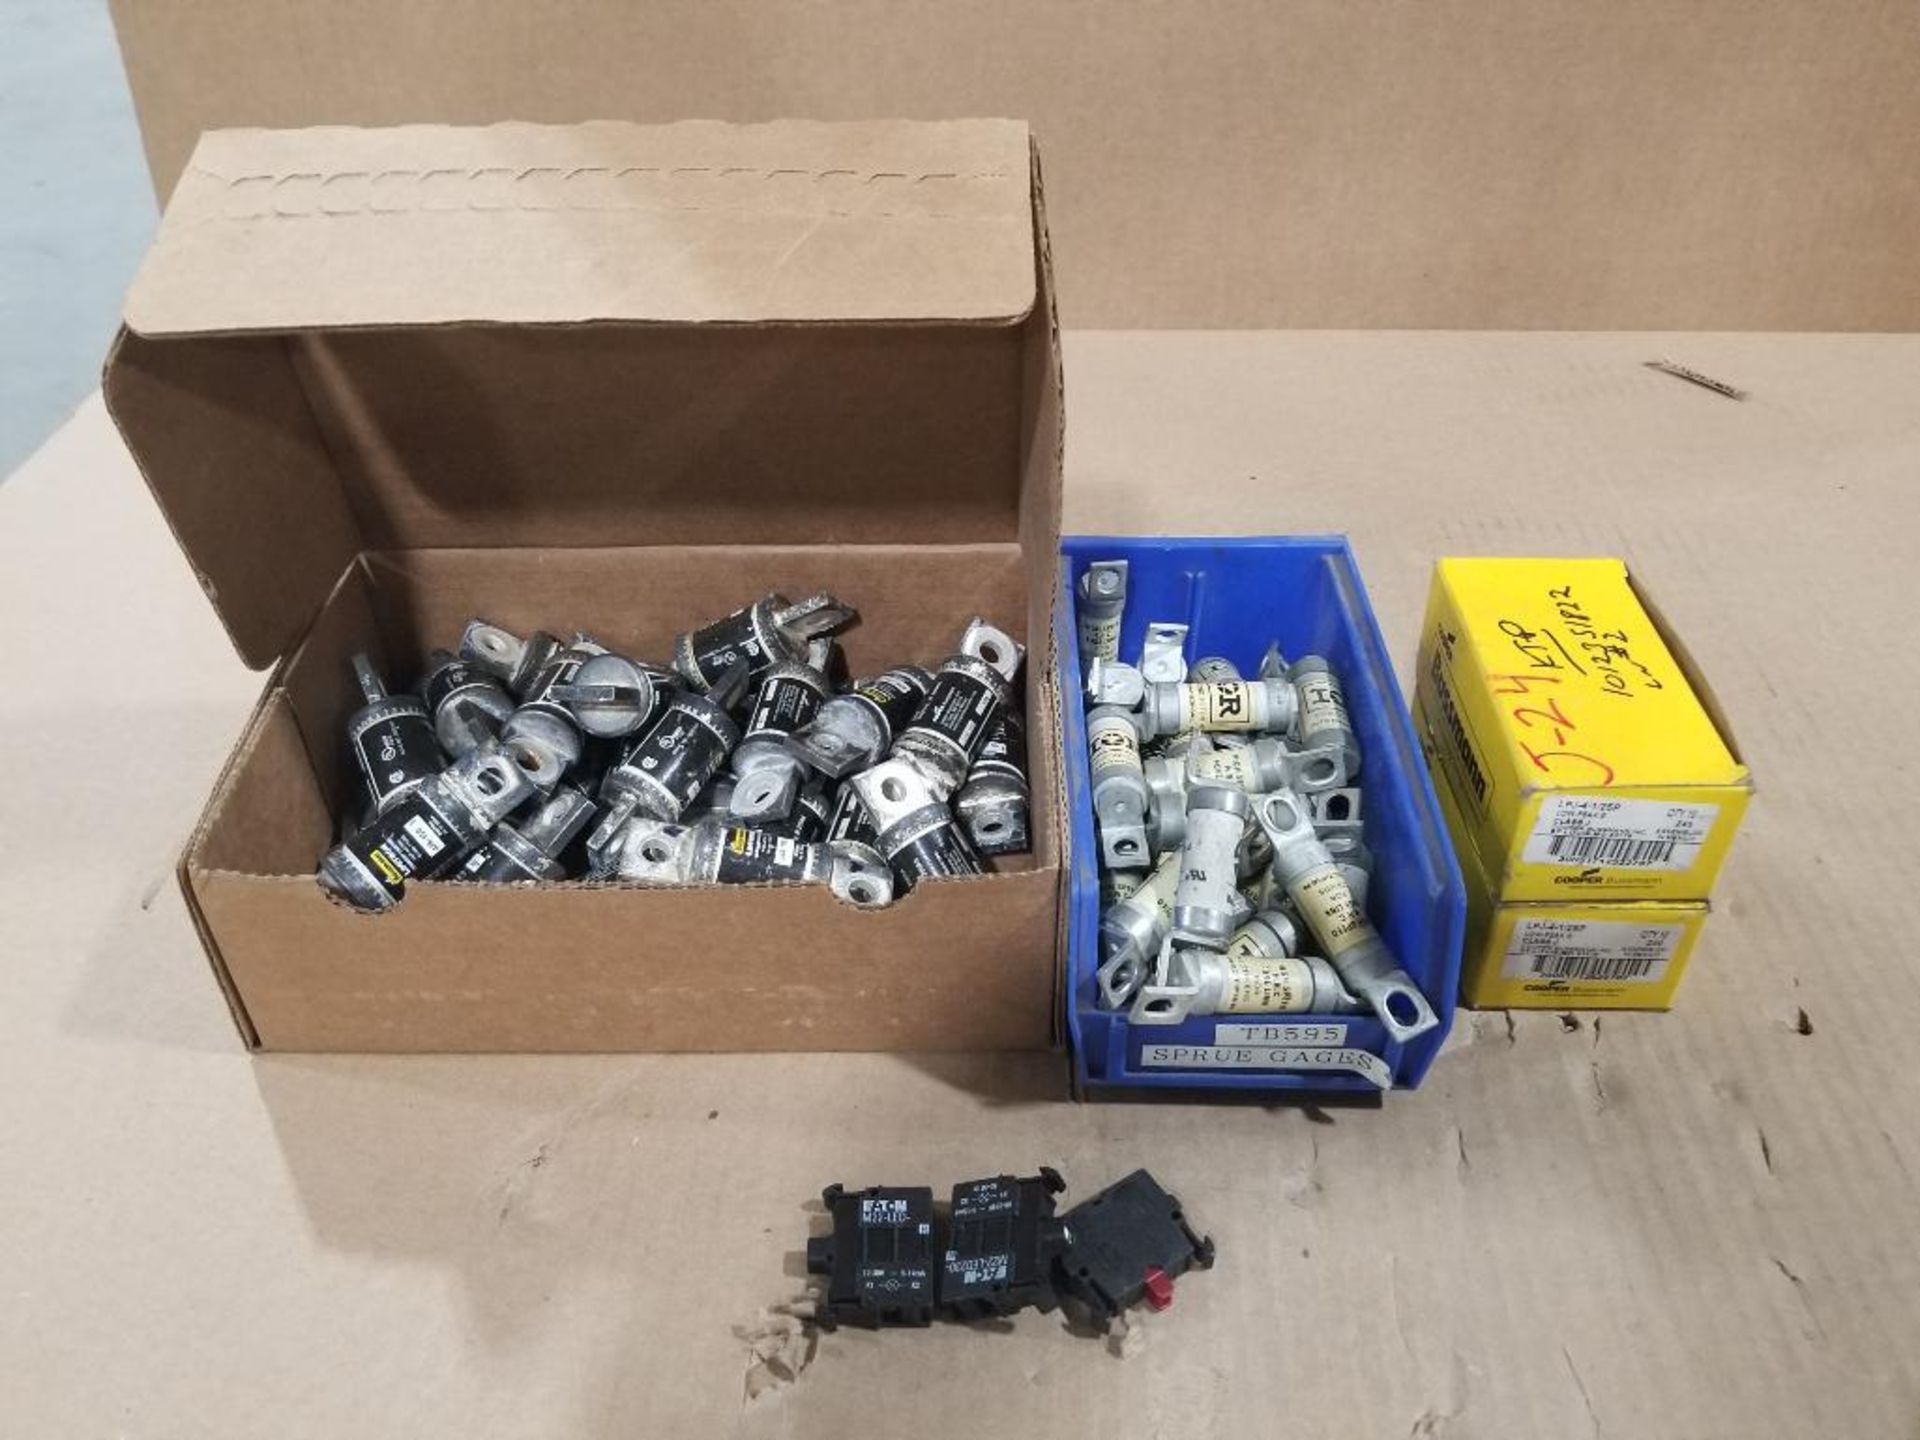 Assorted breakers and fuses.